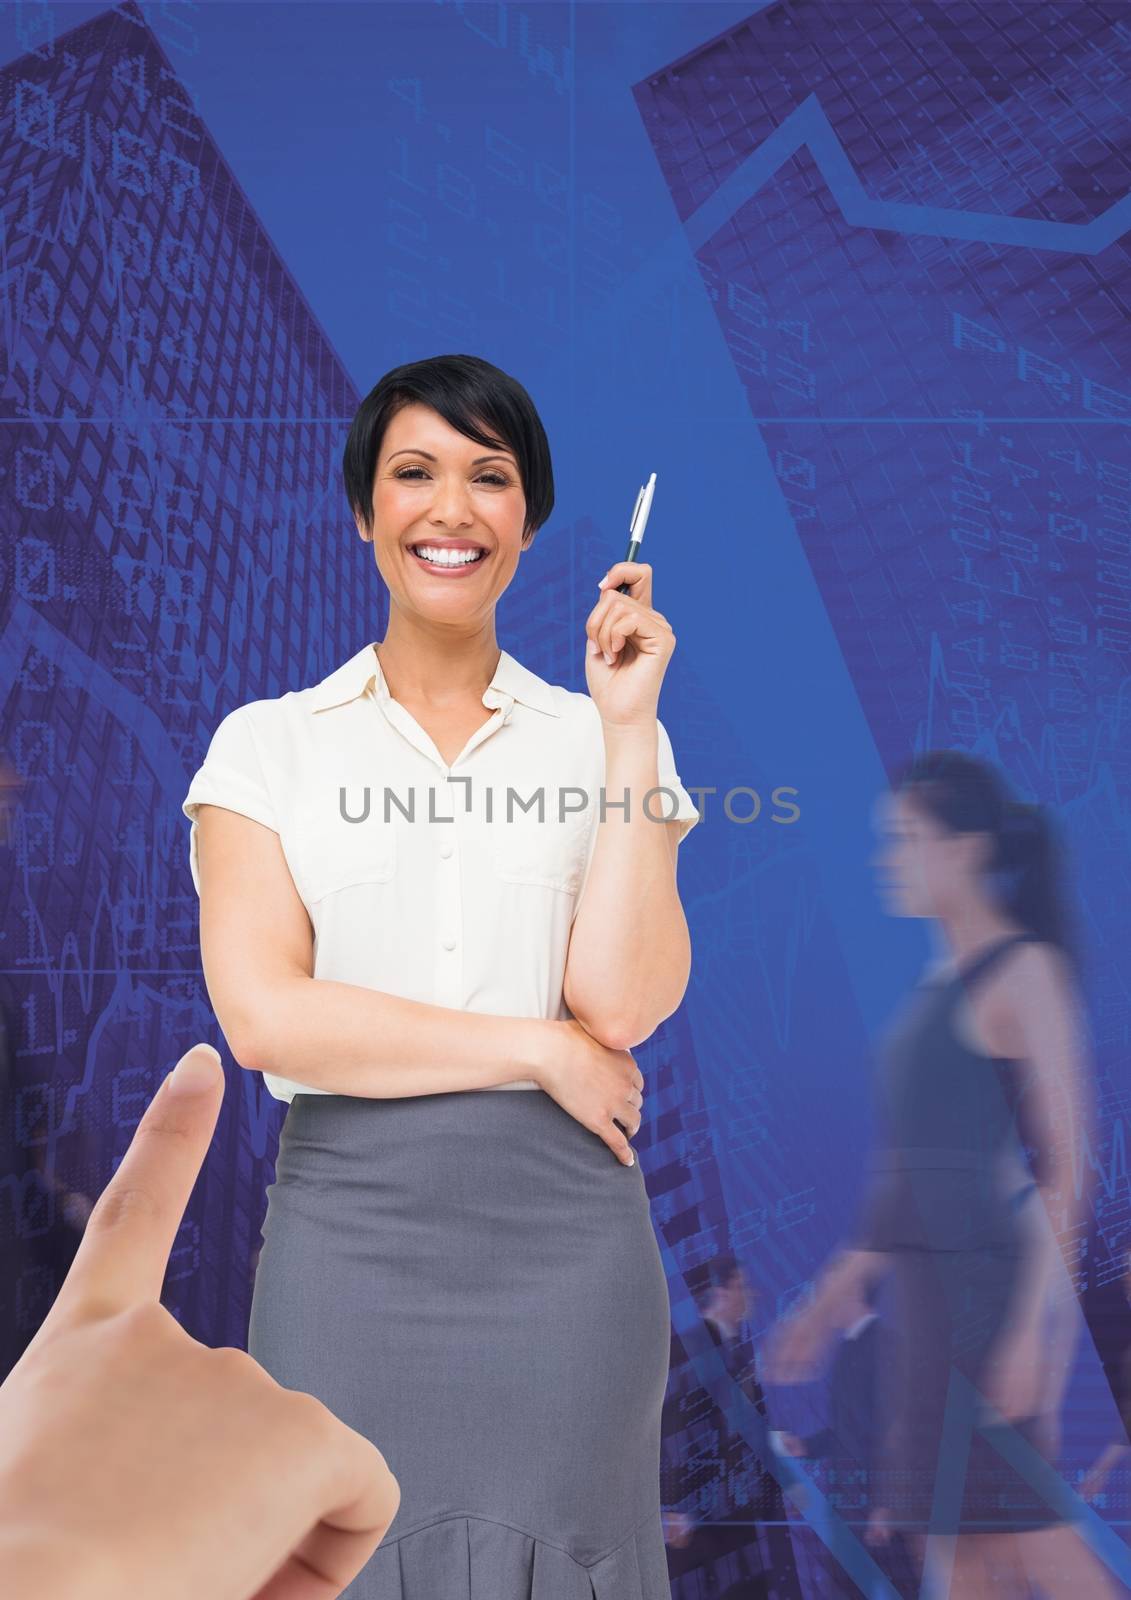 Hand choosing a business woman on blue background with business people walking by Wavebreakmedia